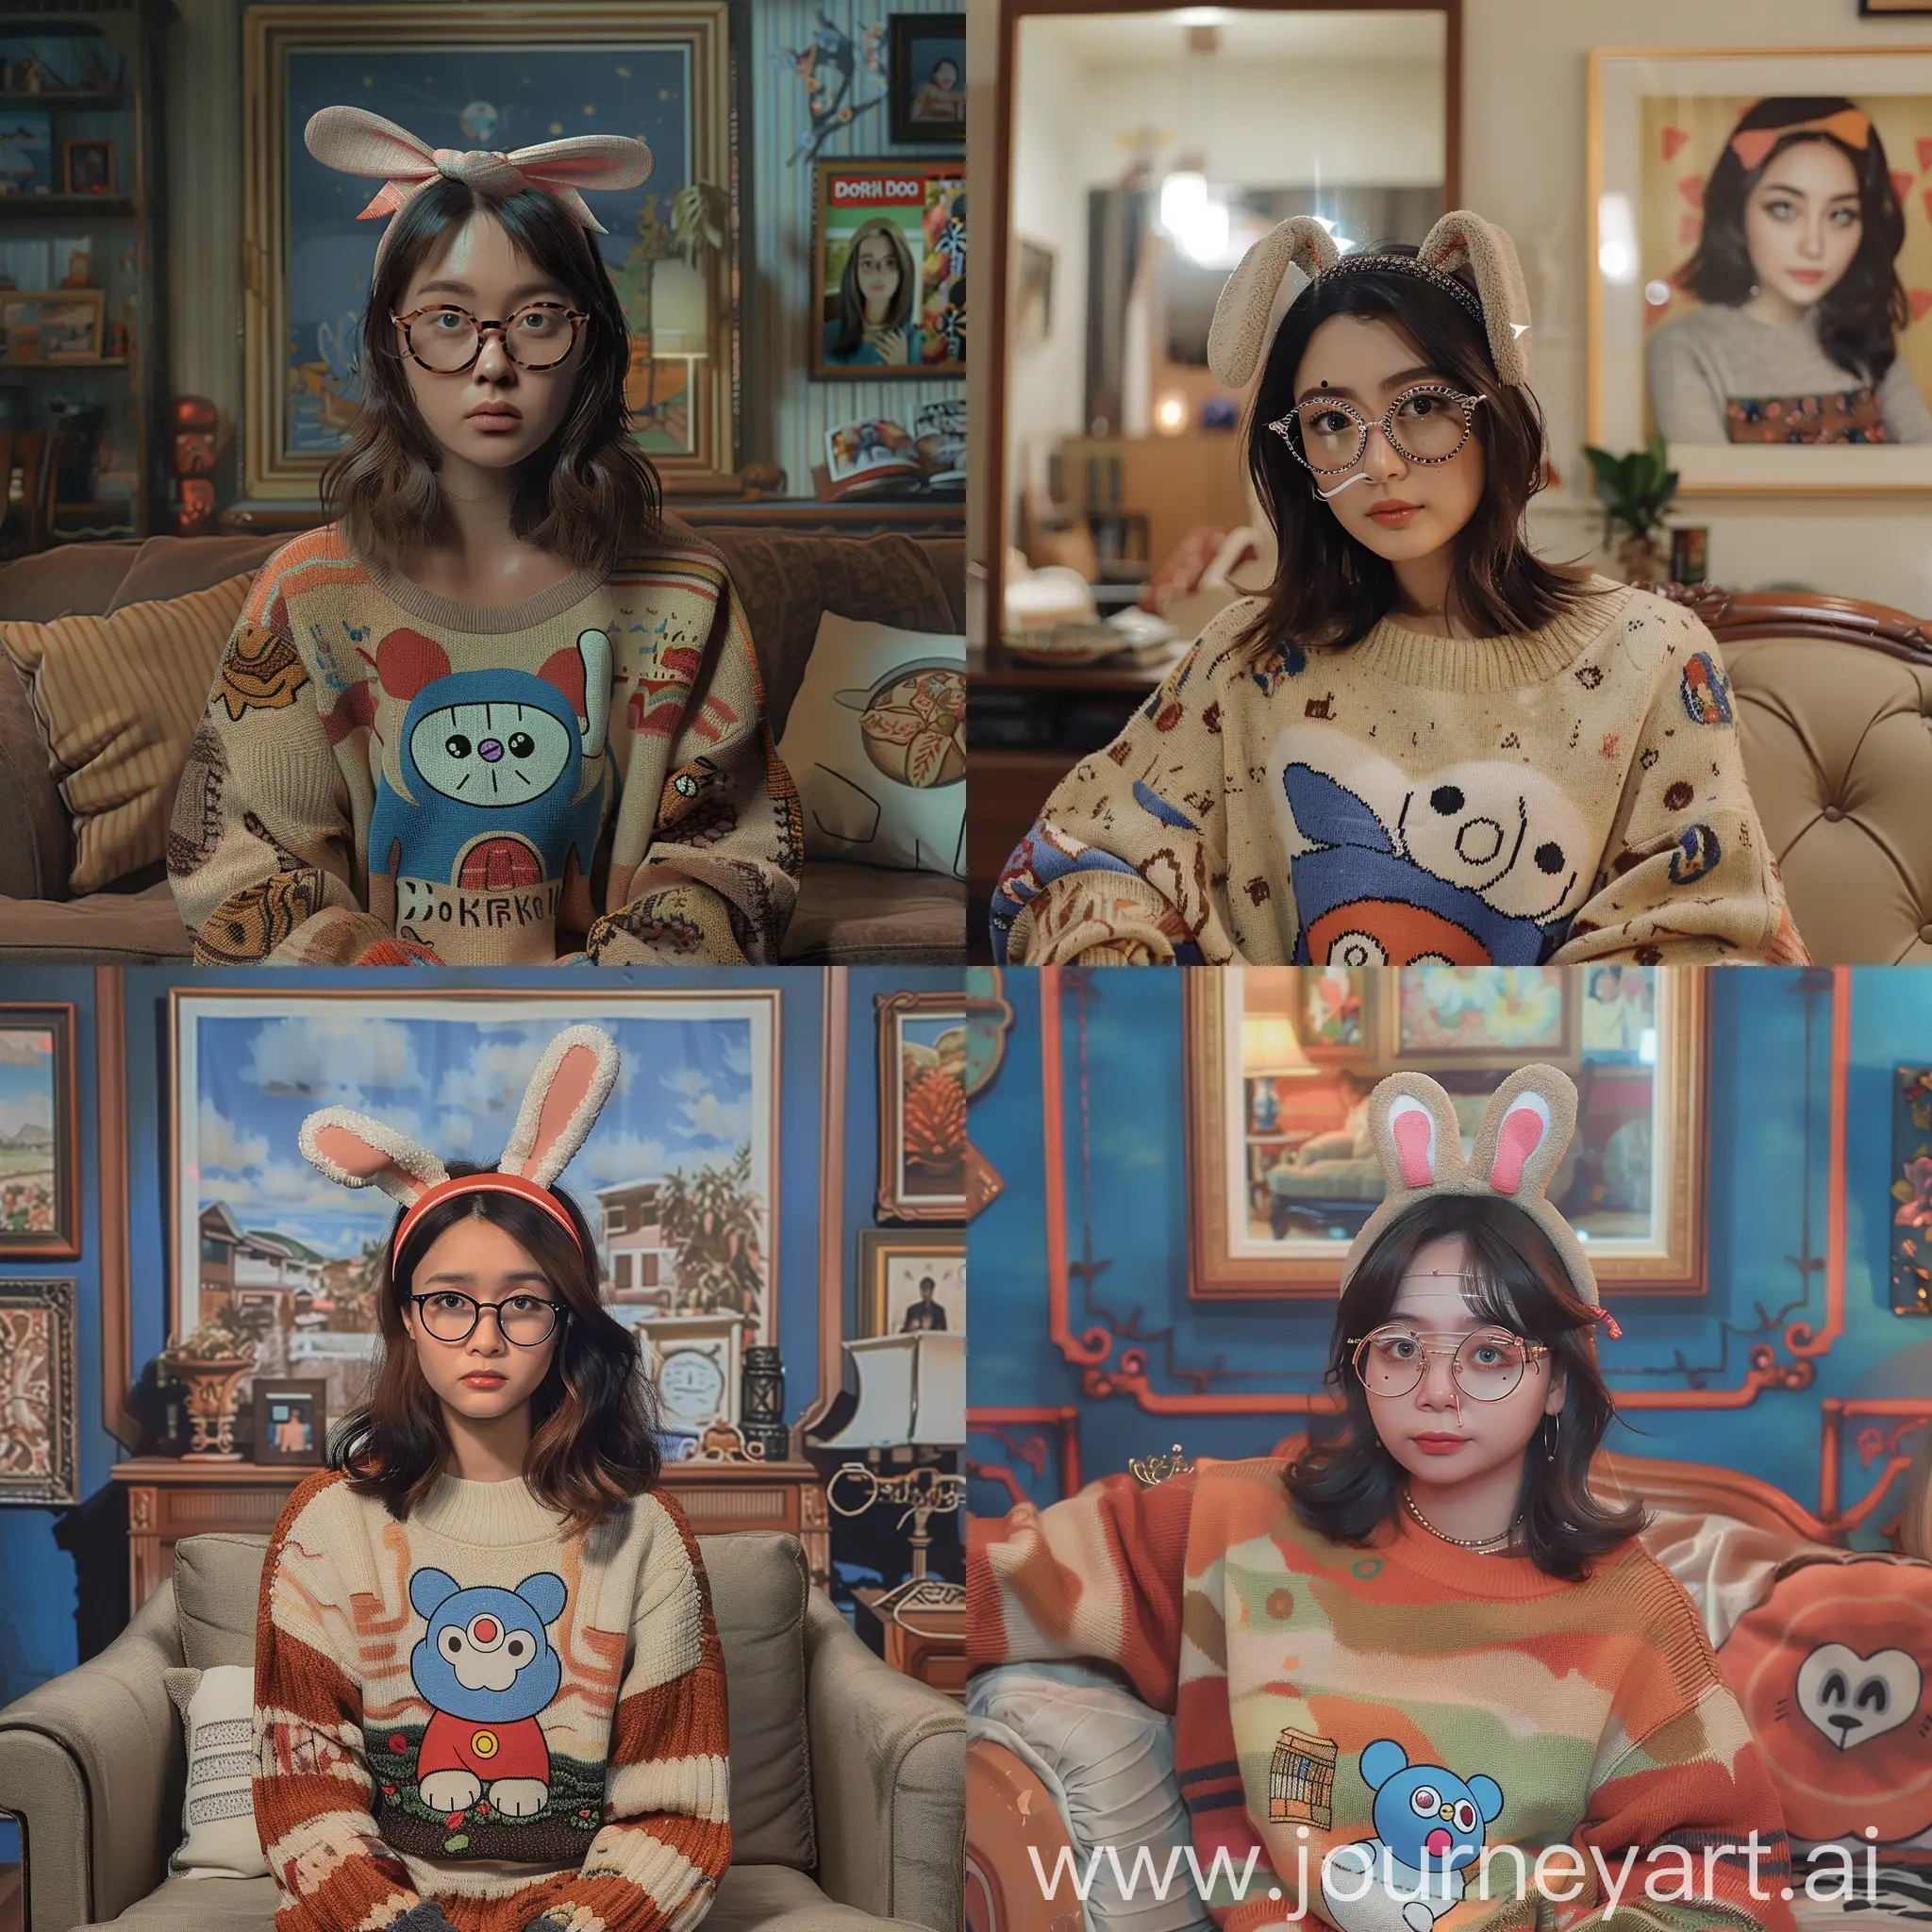 Indonesian-Woman-with-Bunny-Headband-and-Doraemon-Sweater-Sitting-in-Living-Room